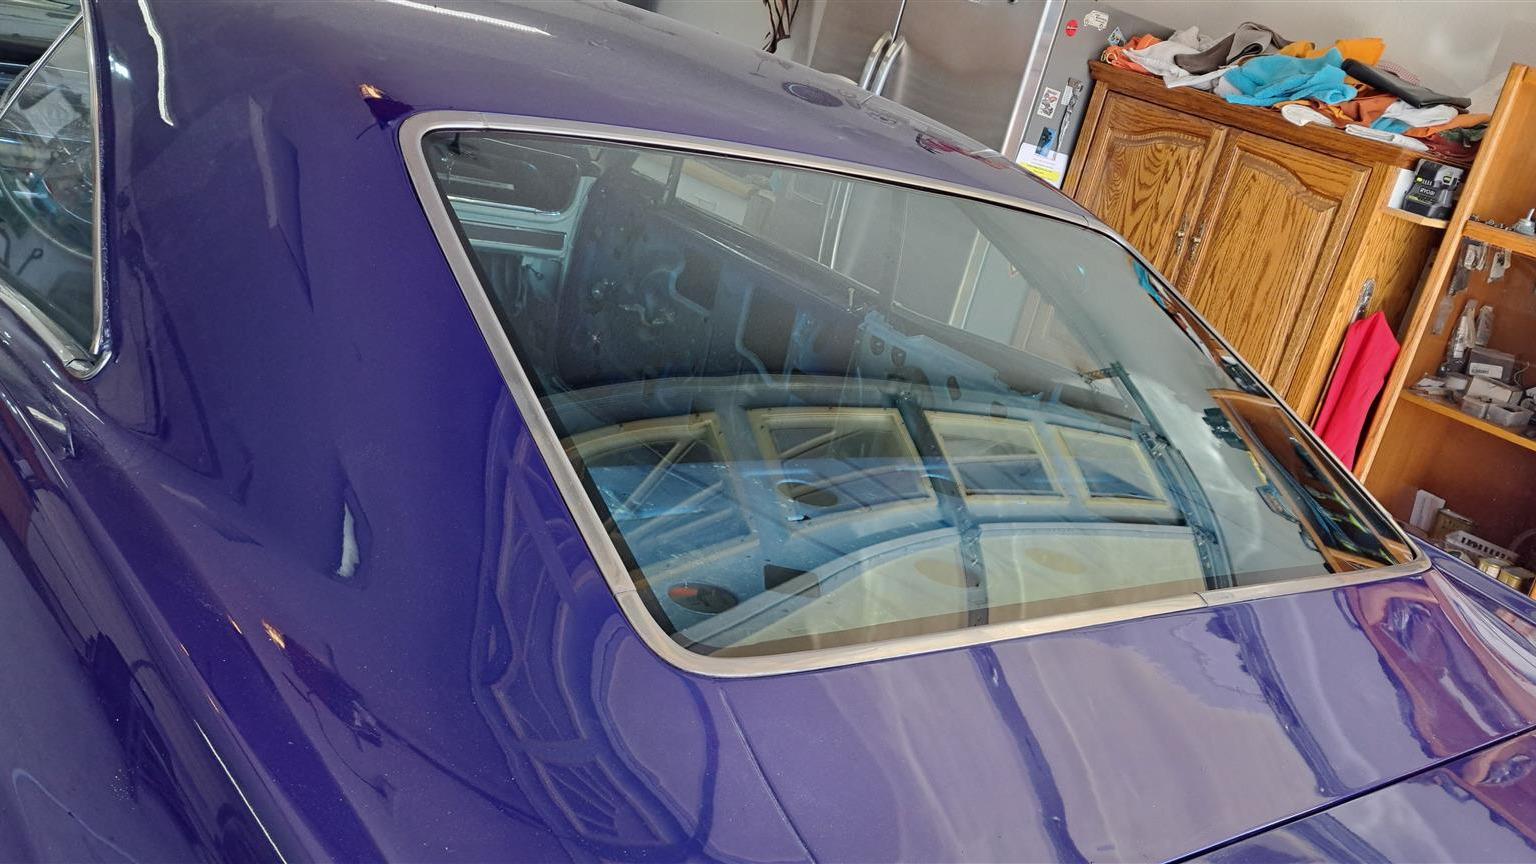 Preserve the timeless beauty of your classic car with C&E Auto Glass's specialized classic car window repair services. I handle delicate restoration and repair of vintage auto glass, maintaining authenticity and originality while ensuring impeccable craftsmanship and attention to detail.